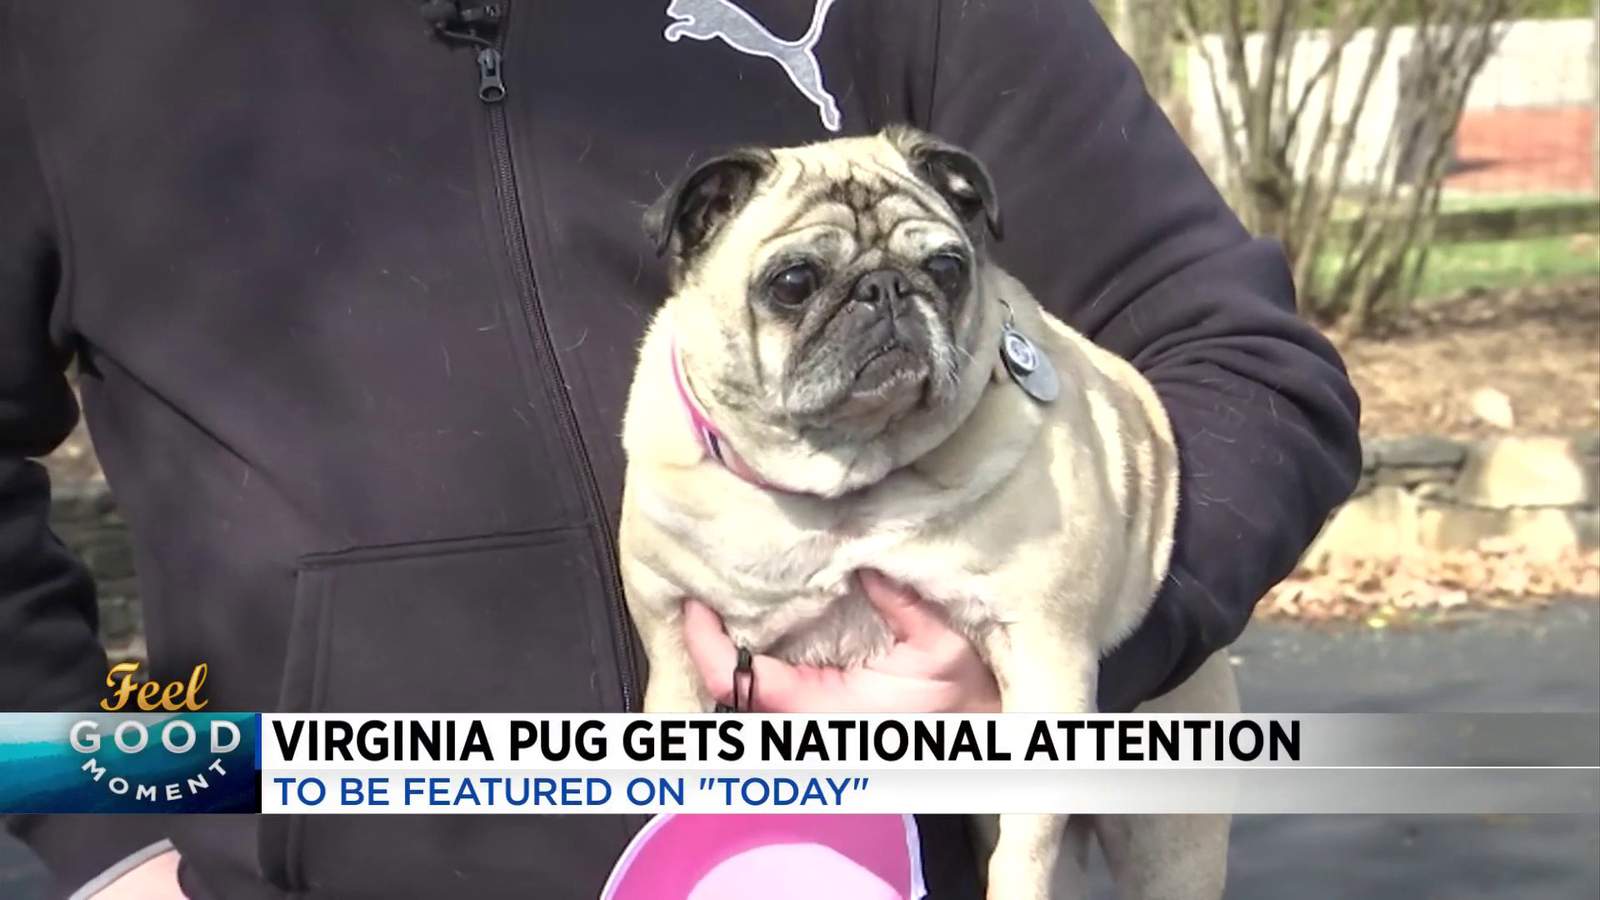 Virginia Pug featured on Today Show